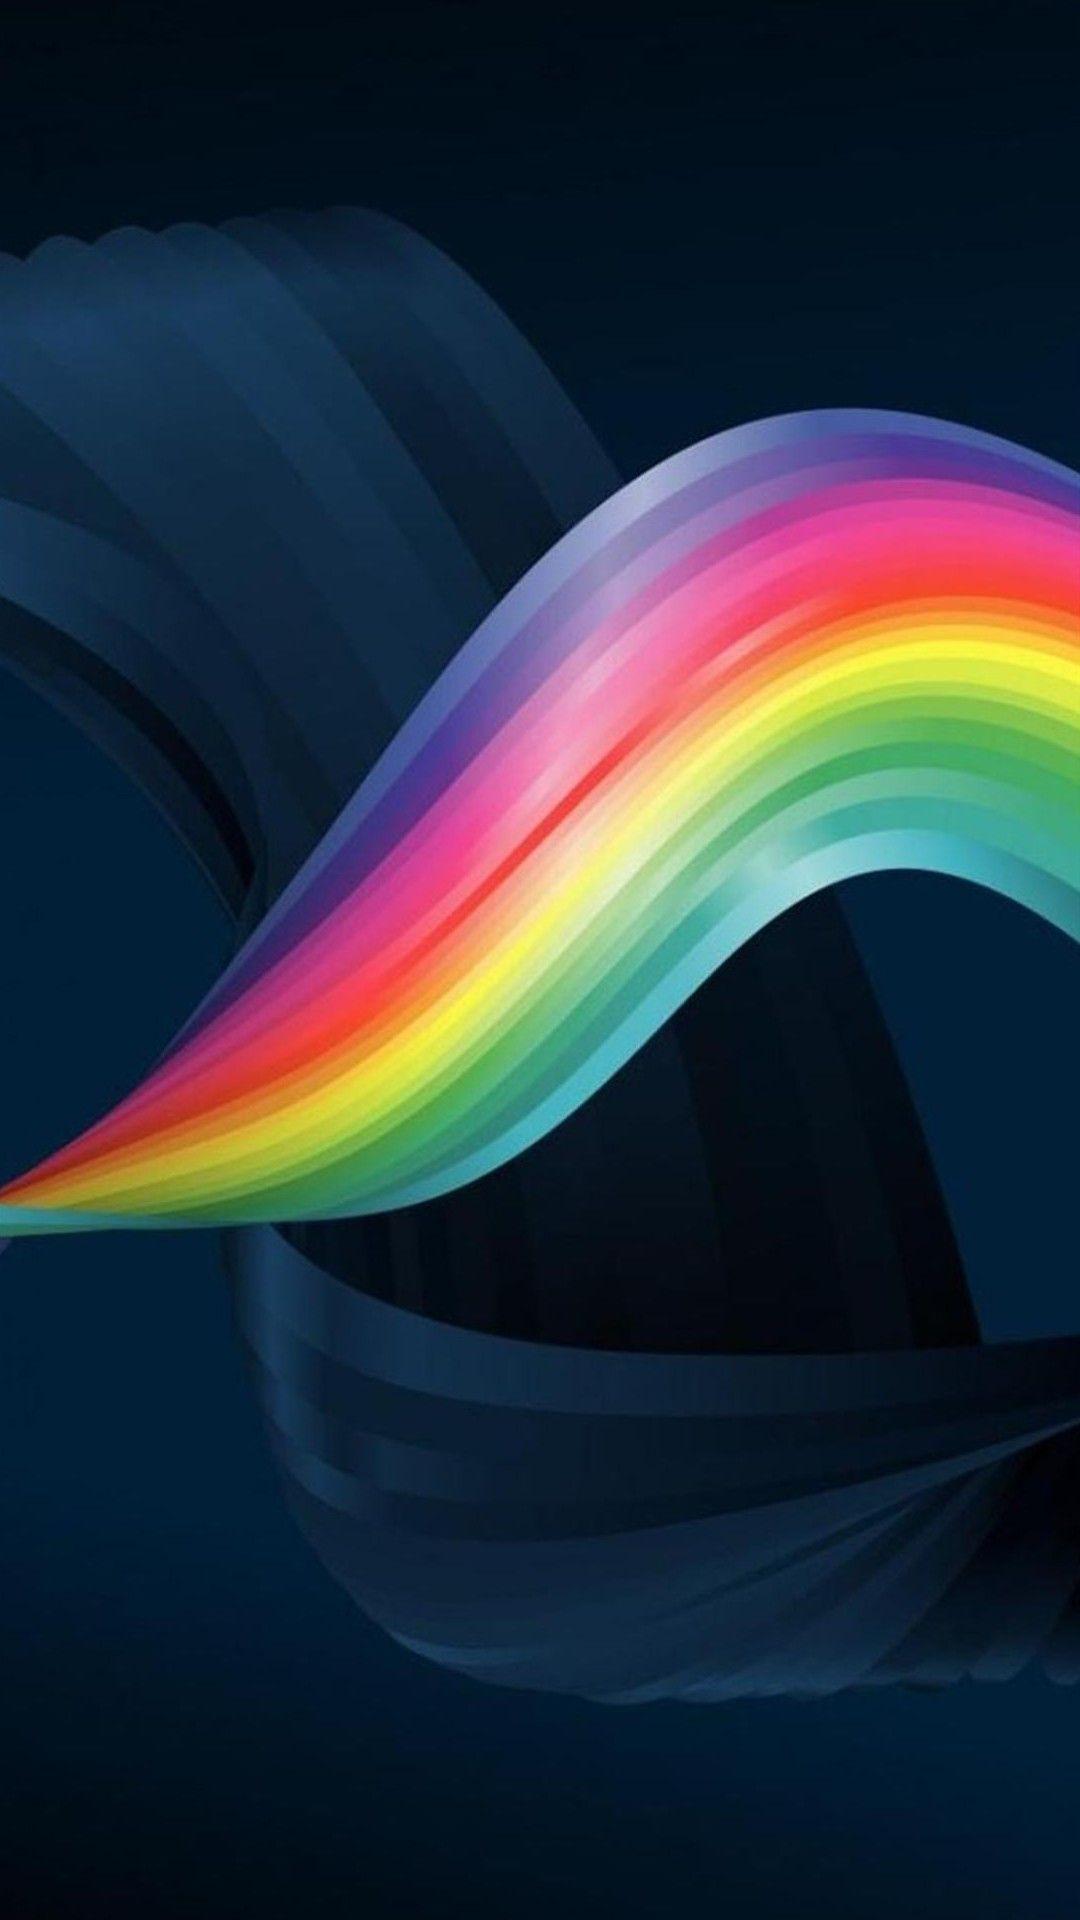 Wallpaper Weekends: Rainbows Hues for the iPhone 6 Plus